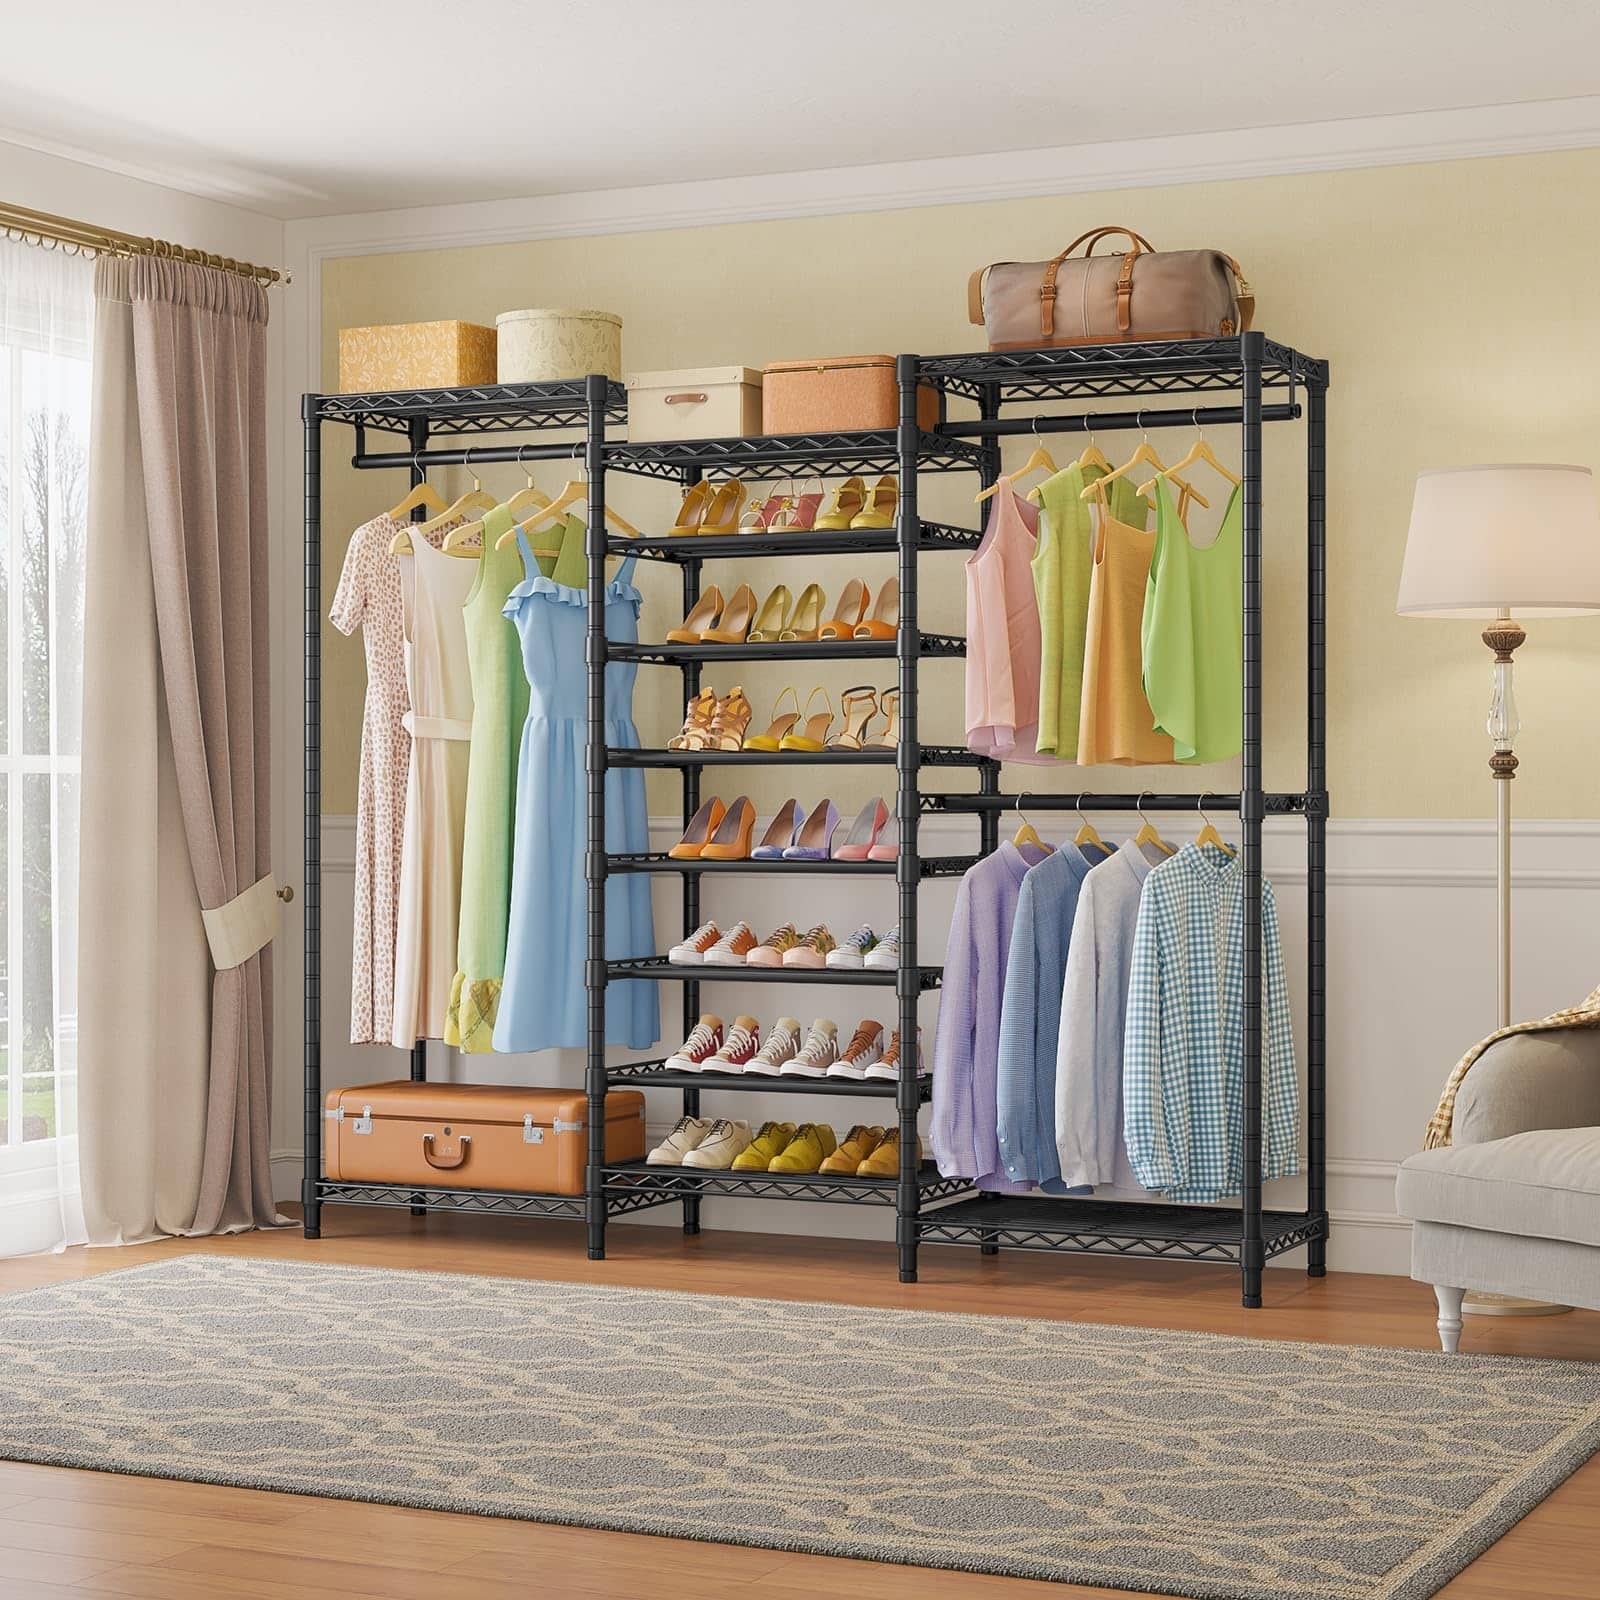 Garment Rack Free Standing Clothes Rack for Bedroom Closet Storage ...